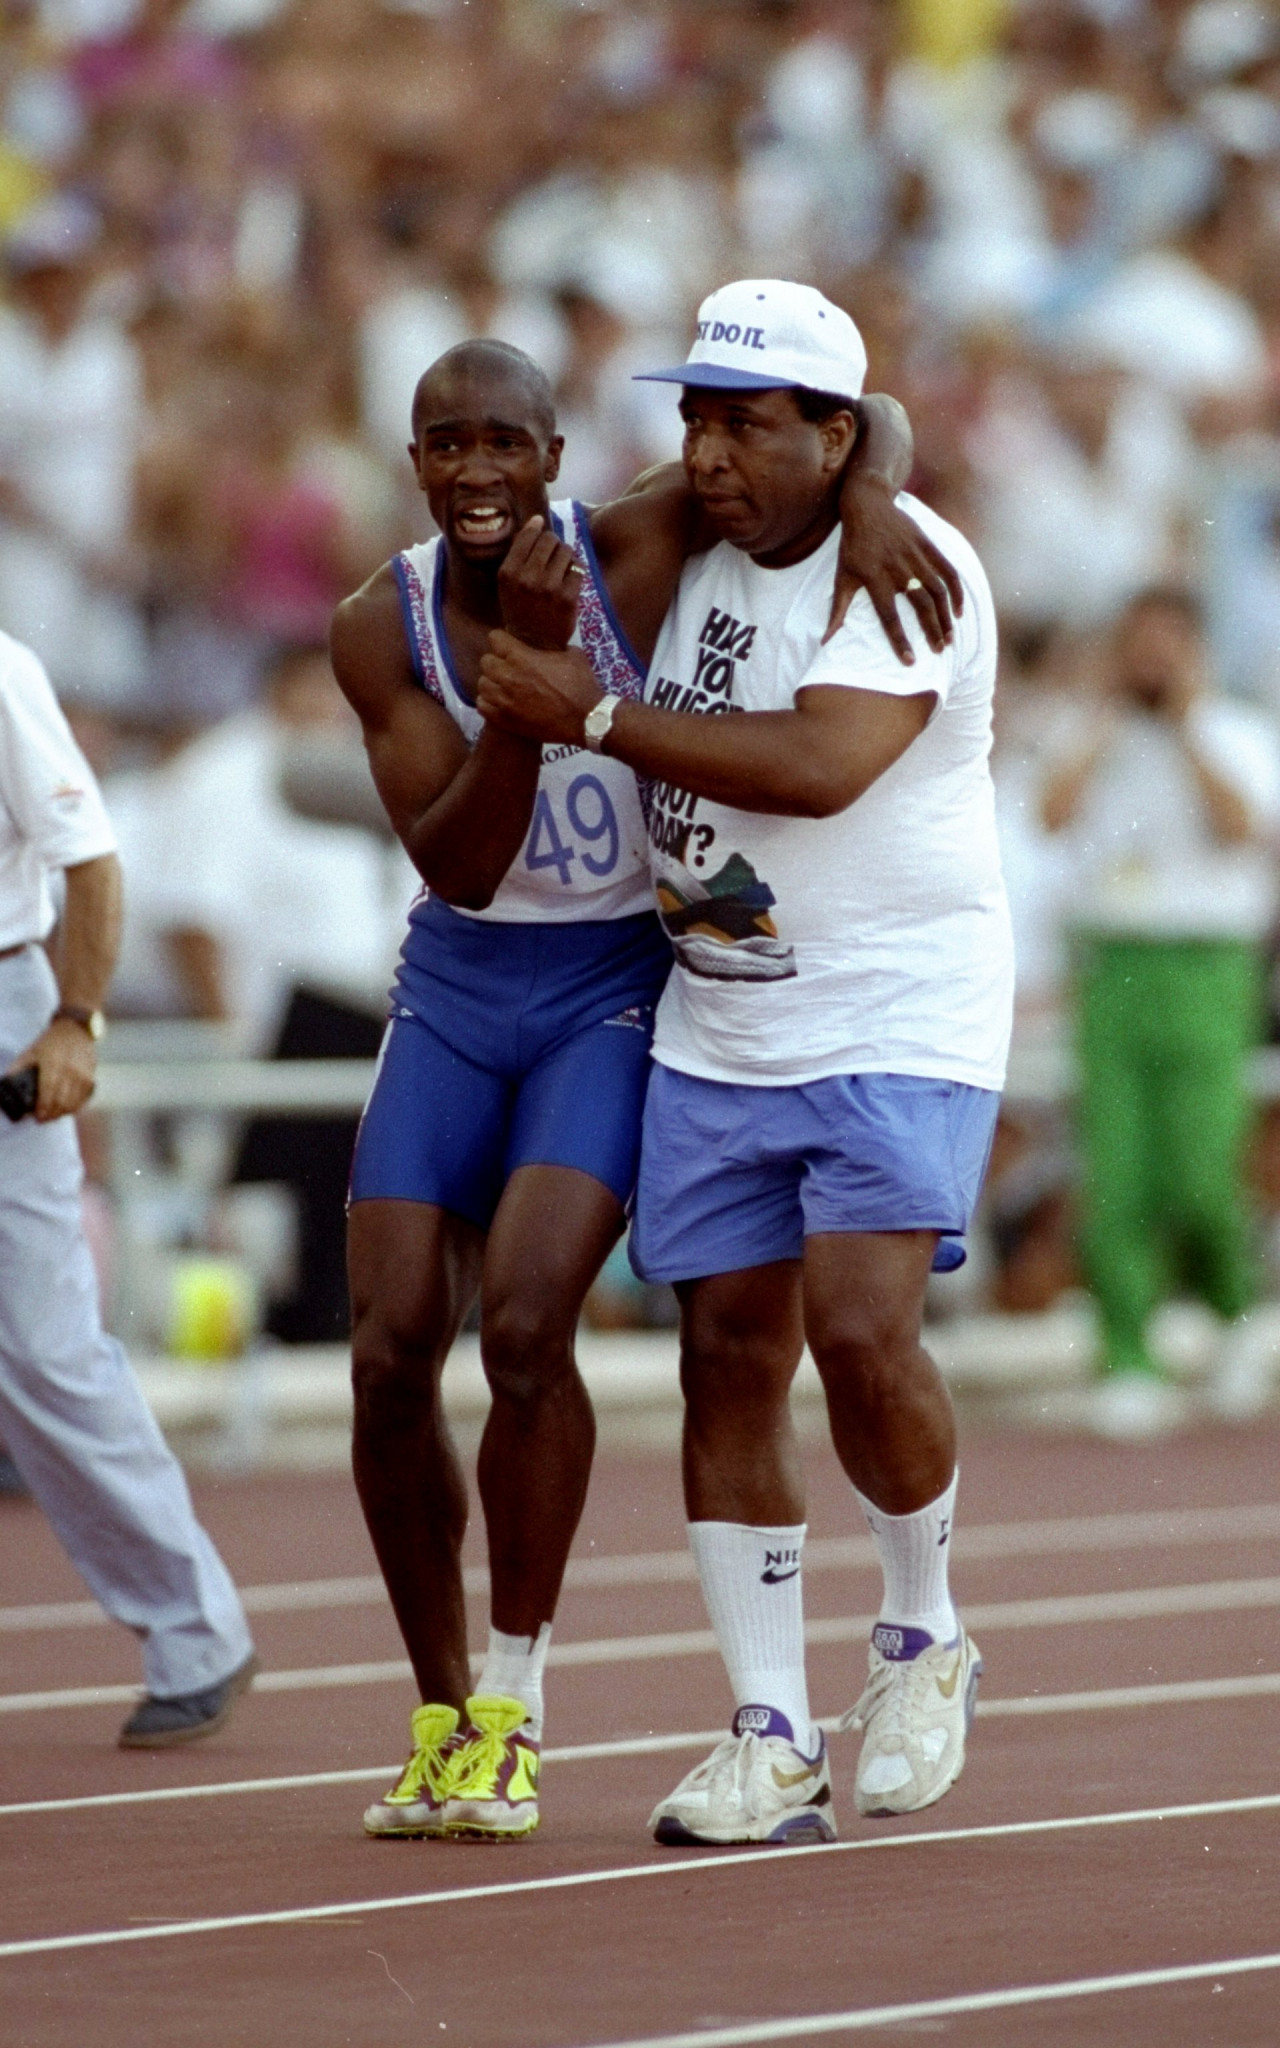 The selfless display in the men's 5000m heats today called to mind a similar incident at the 1992 Barcelona Games when Britain's injured 400m runner Derek Redmond was helped home by his father, Jim ©Getty Images 